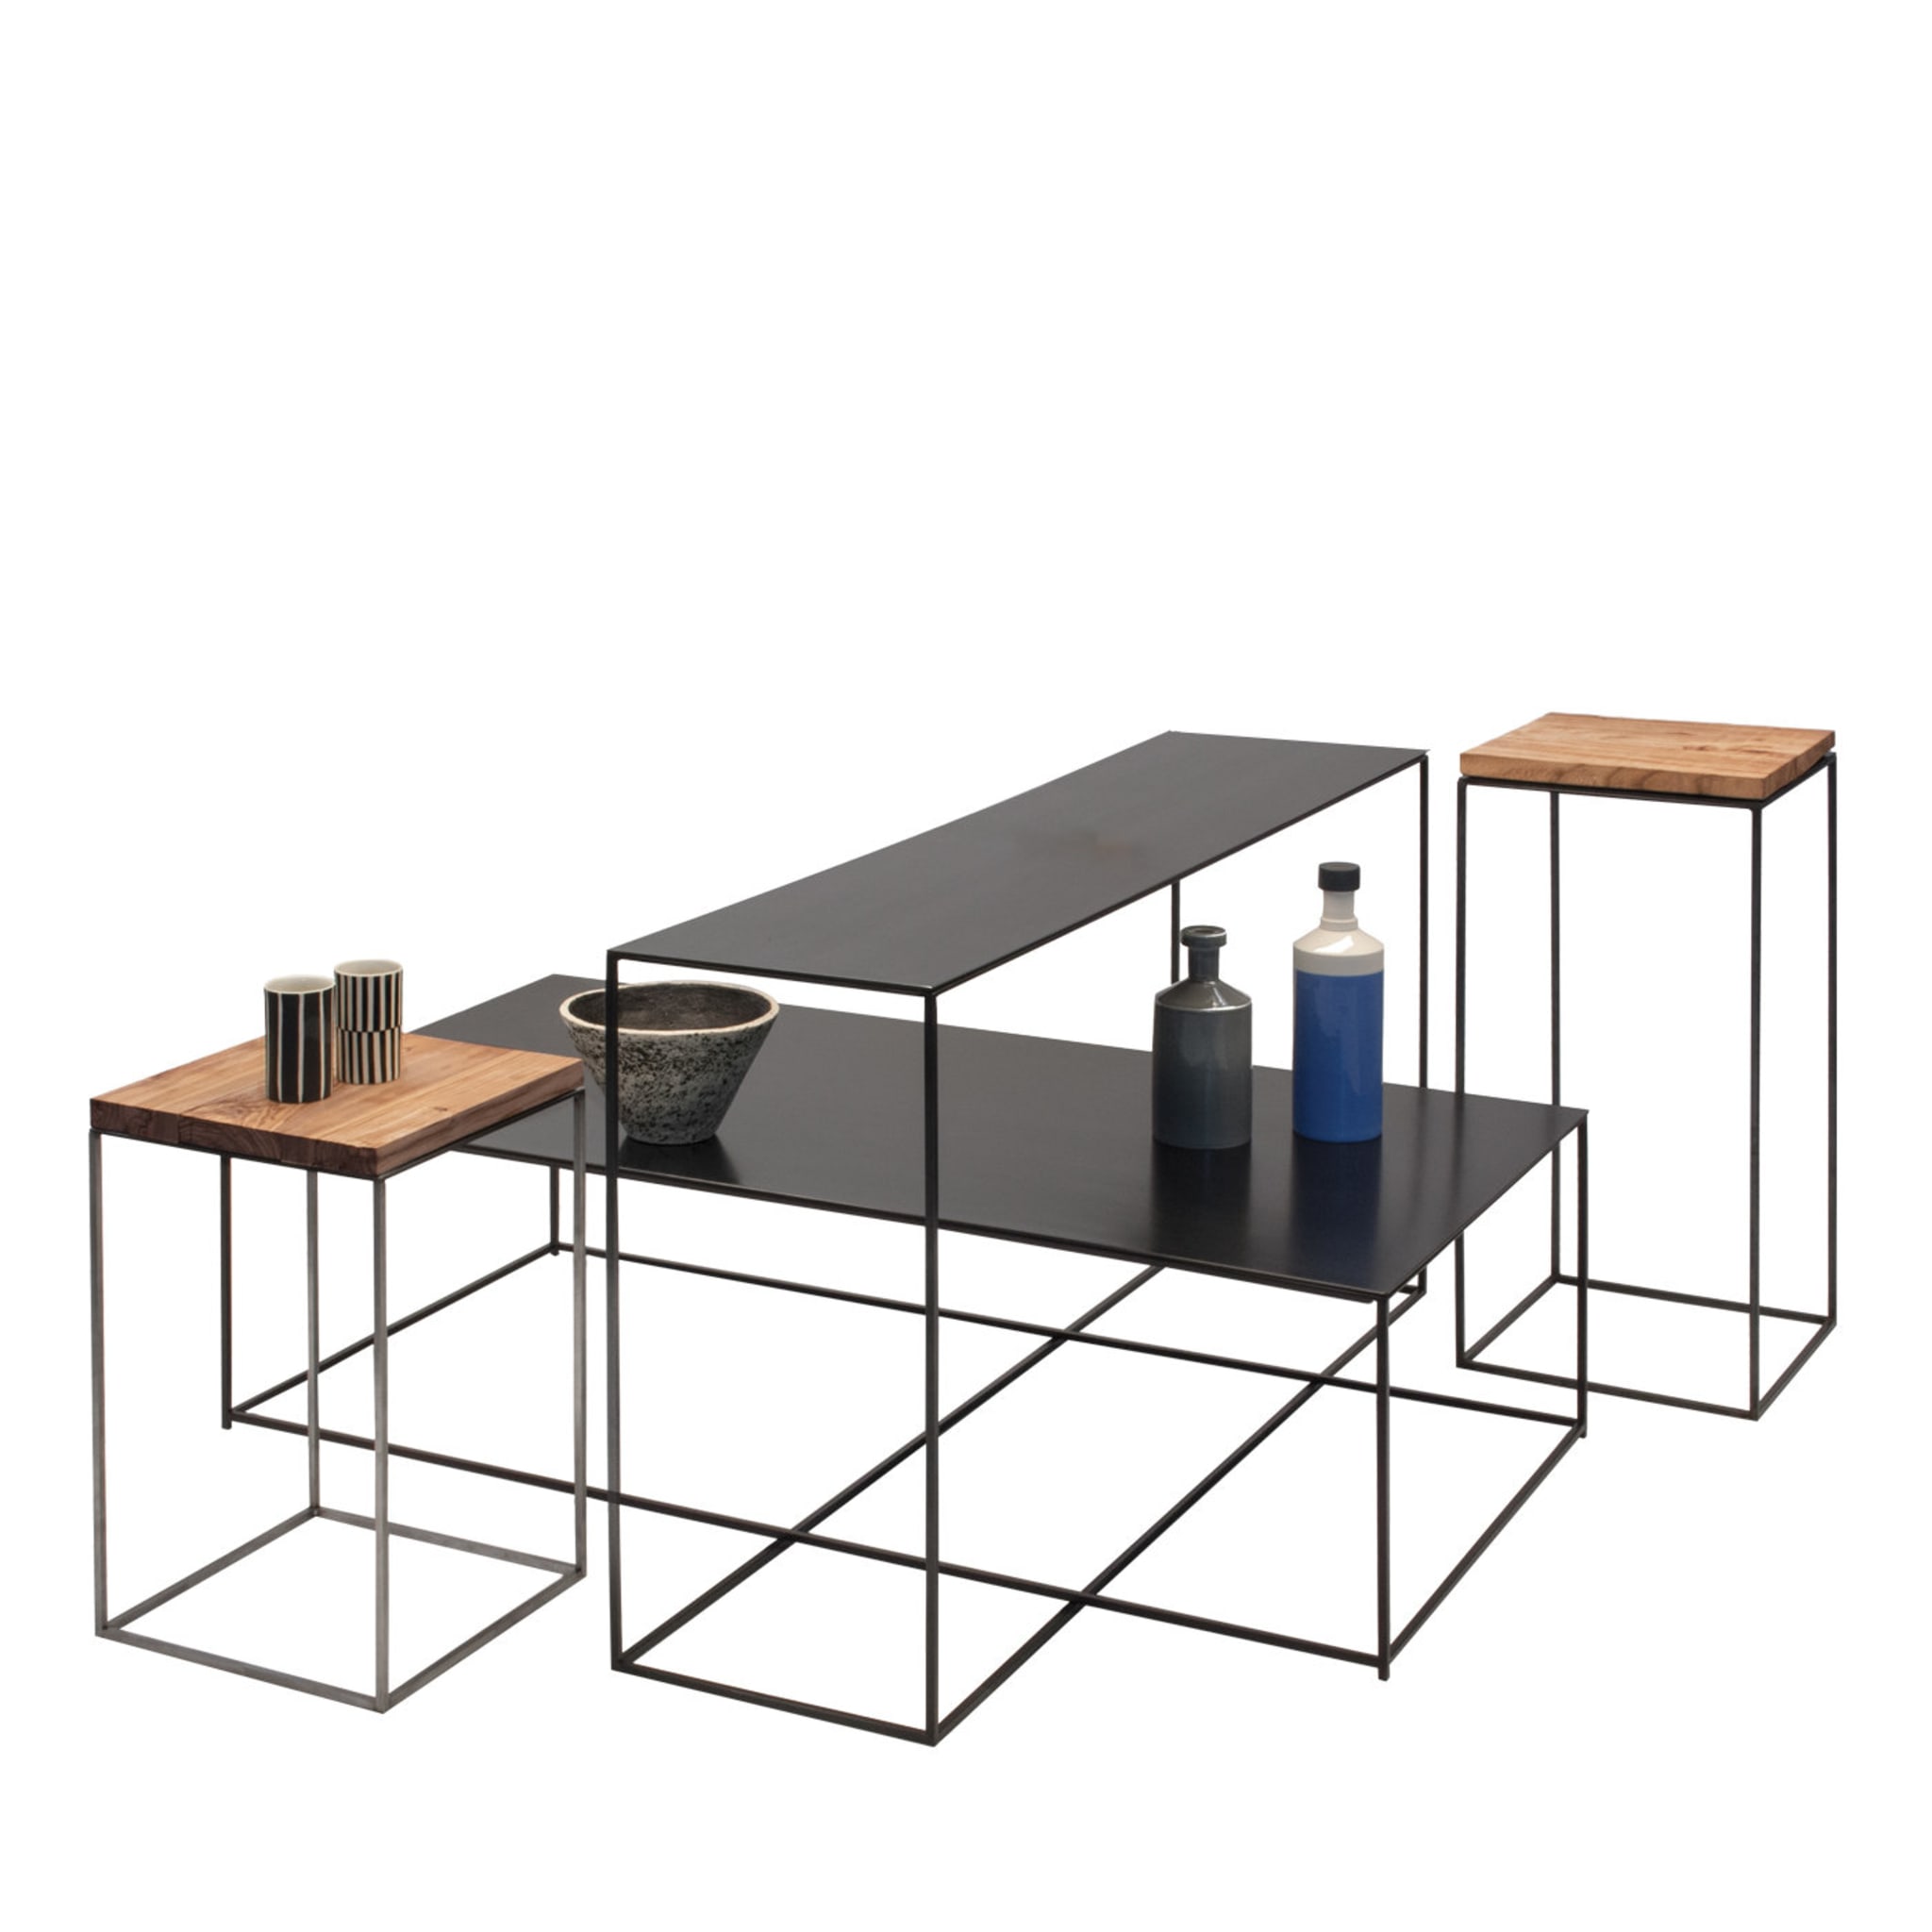 Set of 4 Slim Irony Low Tables - Main view